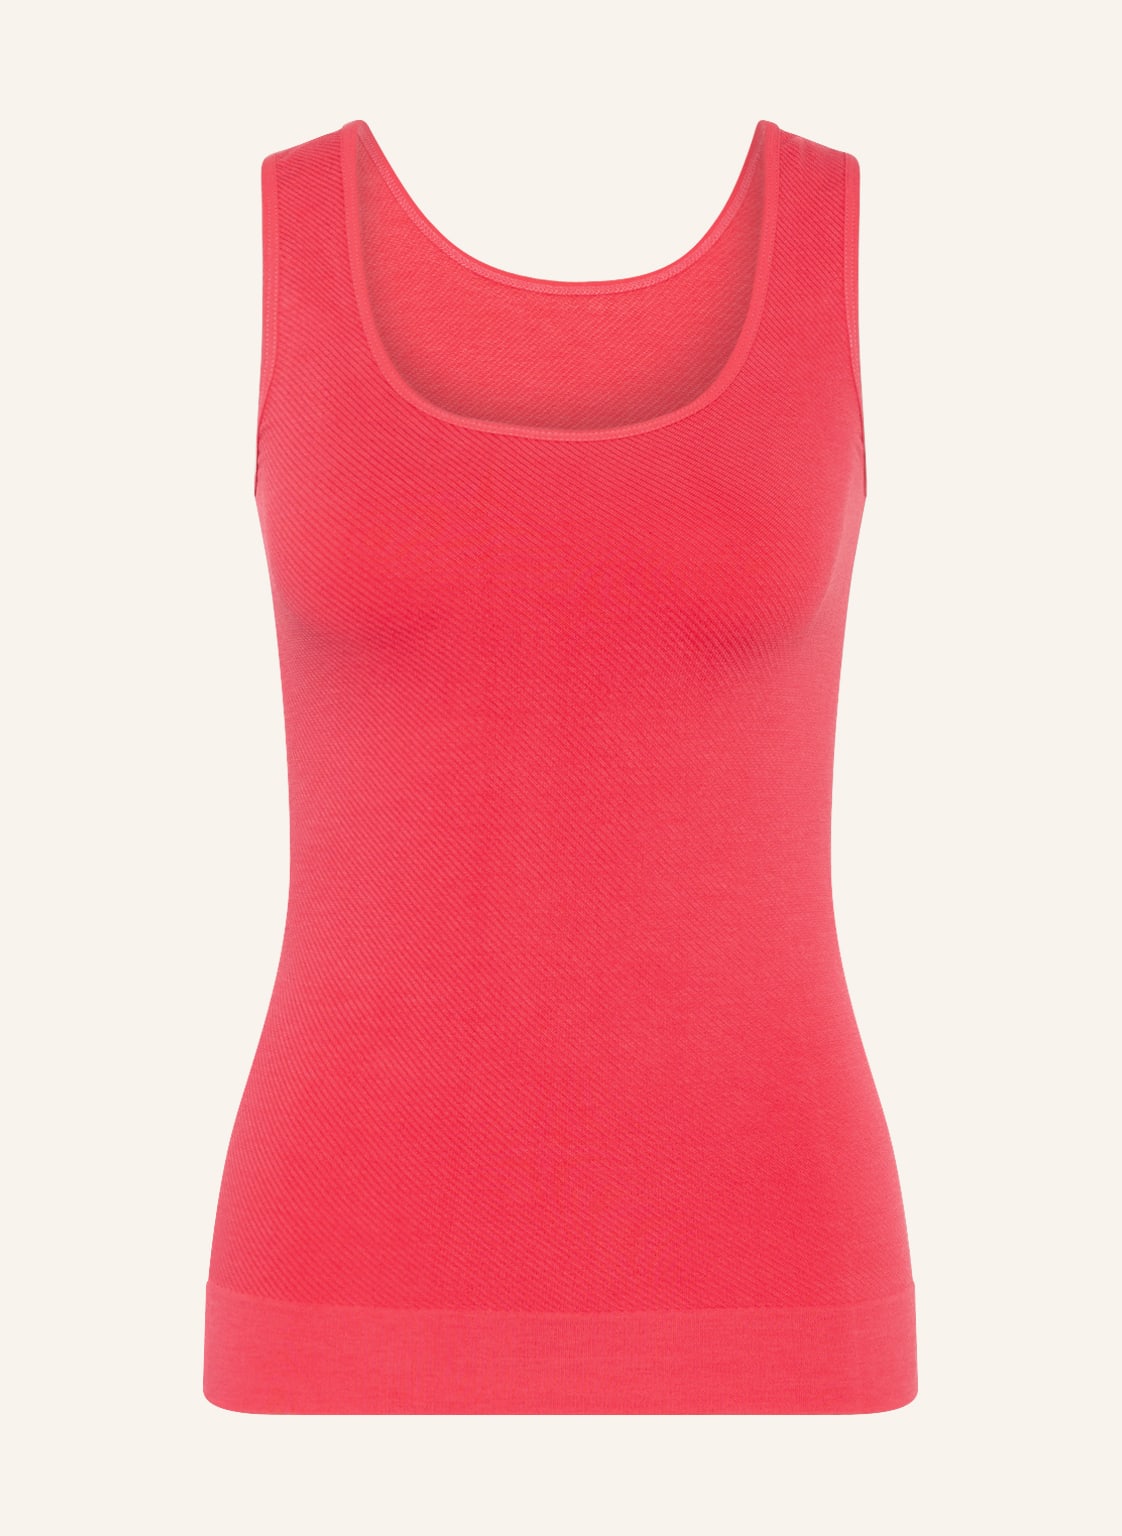 Image of Item m6 Shape-Top Soft Ribbed pink